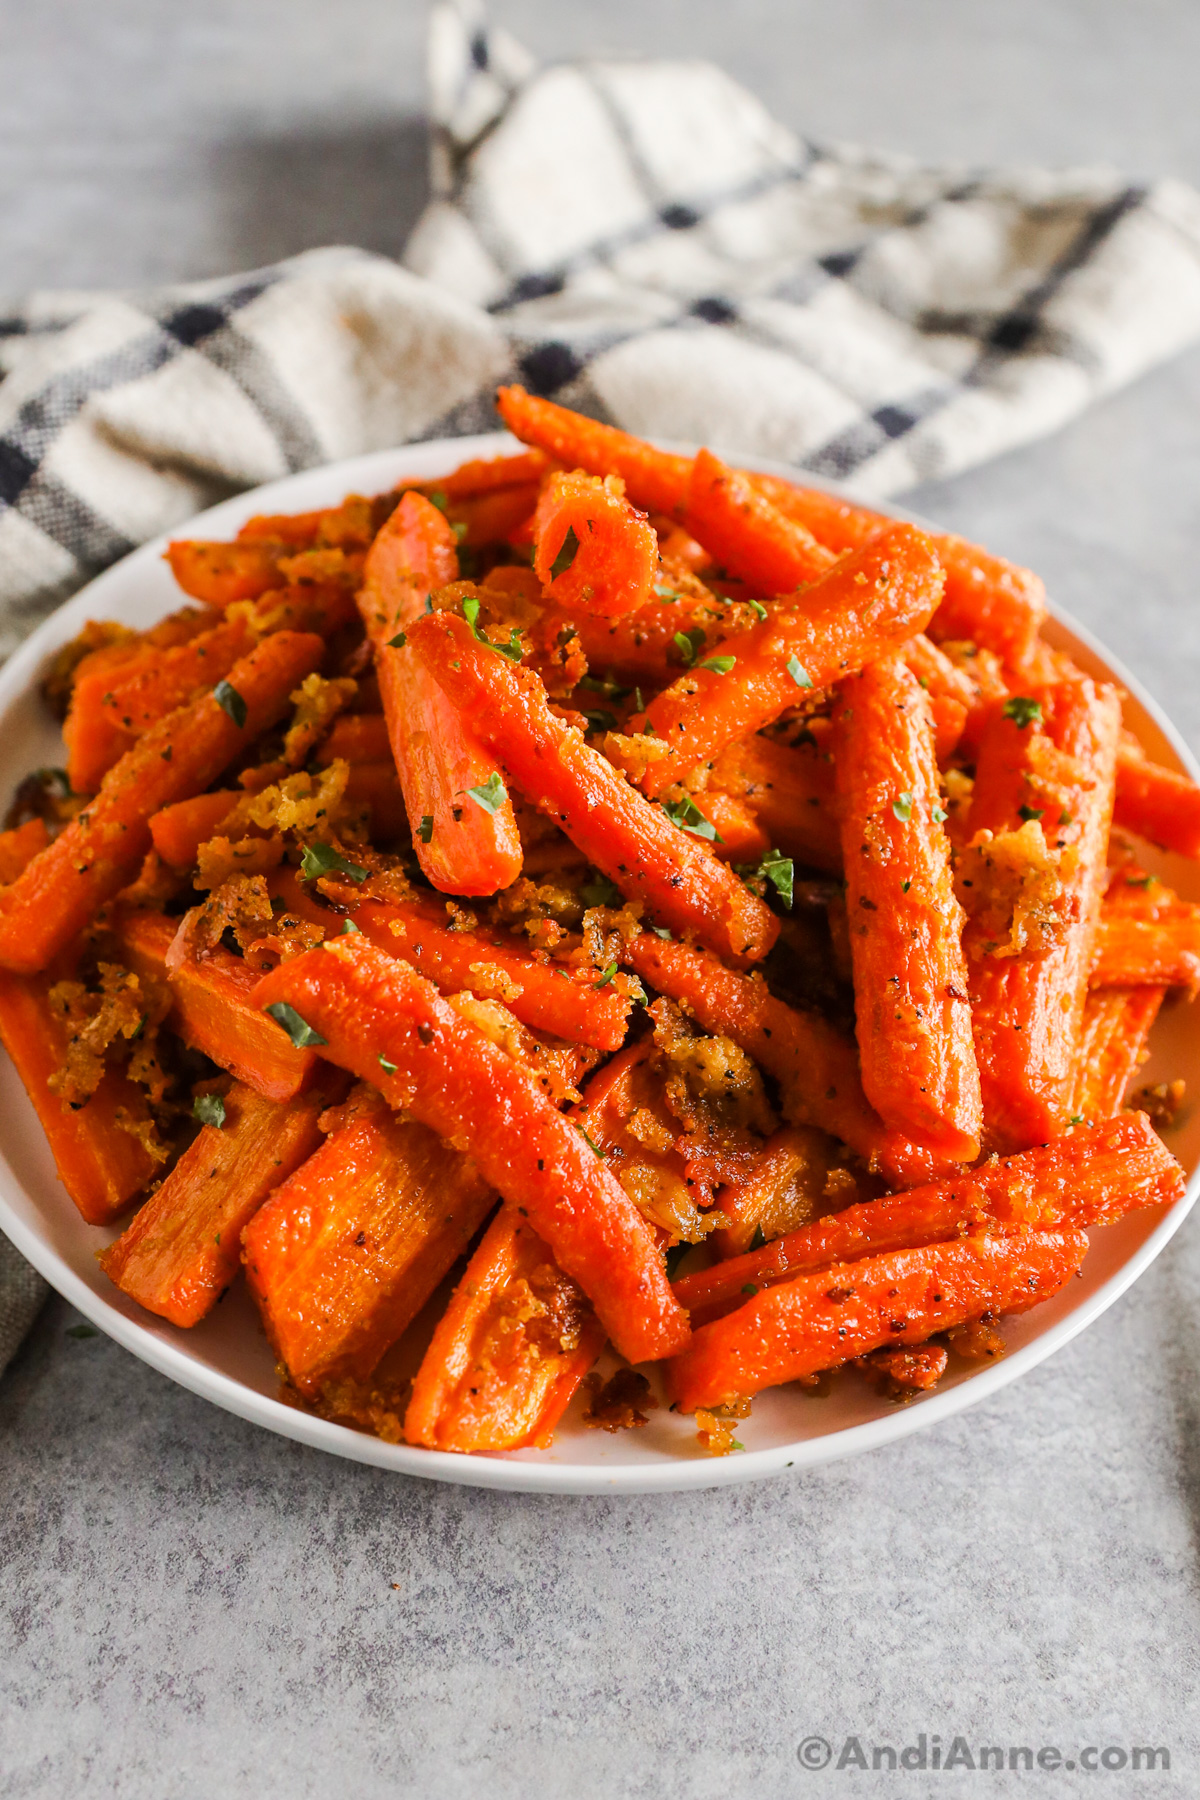 Roasted carrots with parmesan and bread crumbs on a white plate.